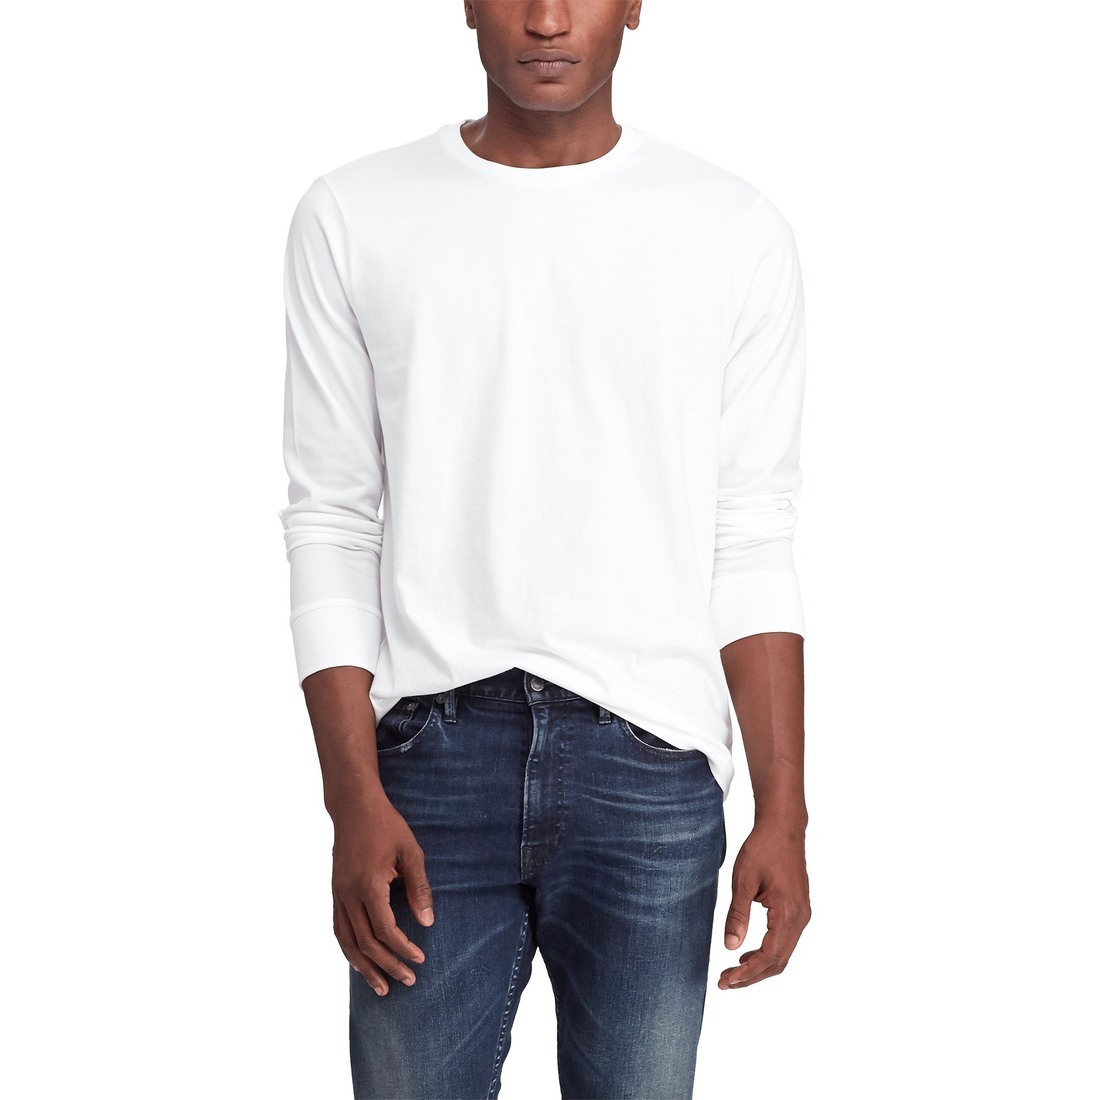 Create Your Own Men's Long Sleeve T-Shirt